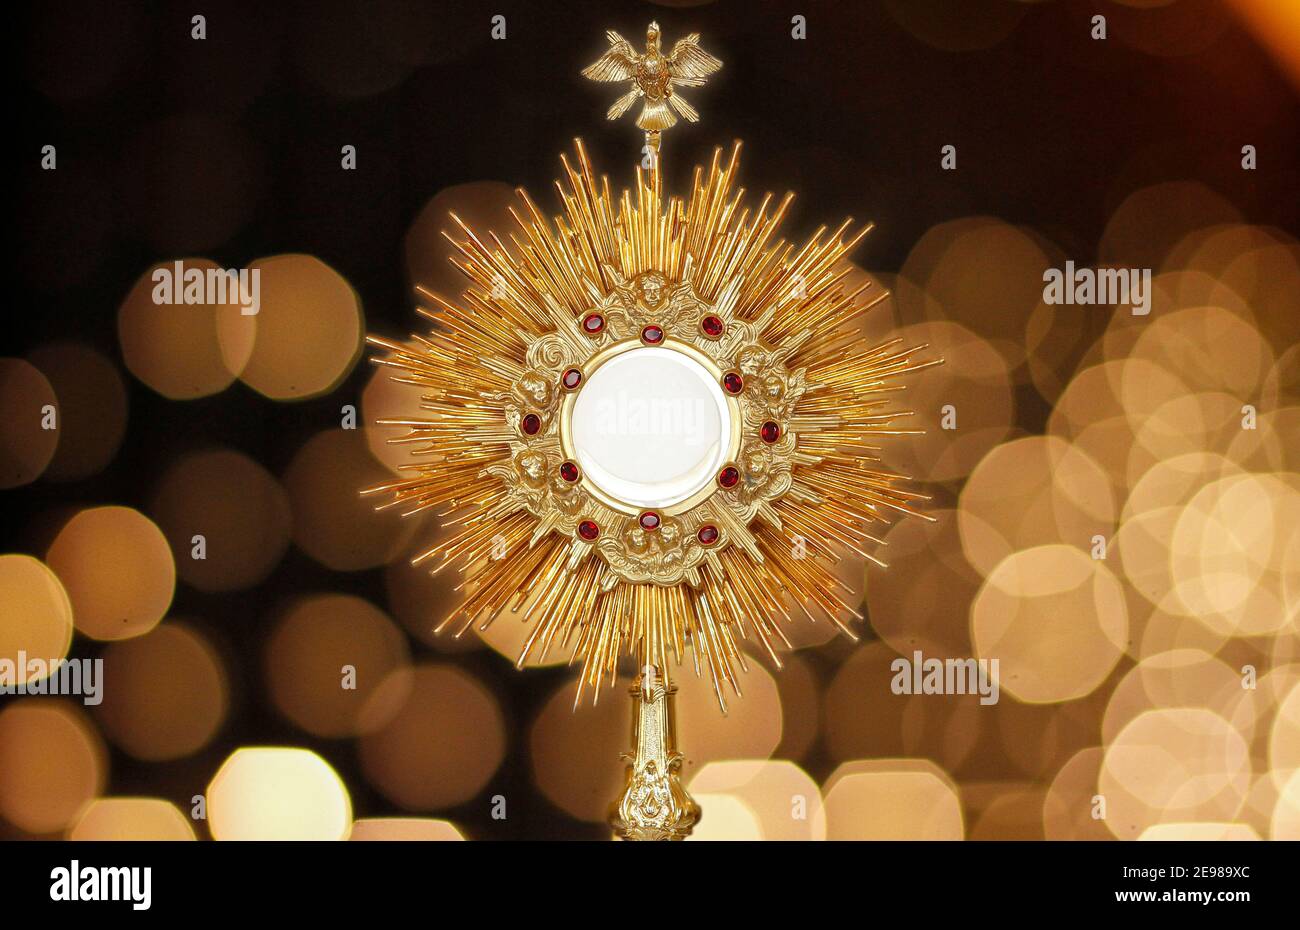 Ostensorium for worship at a Catholic church ceremony - sacred object of devotion and exposure of the Blessed Sacrament Stock Photo